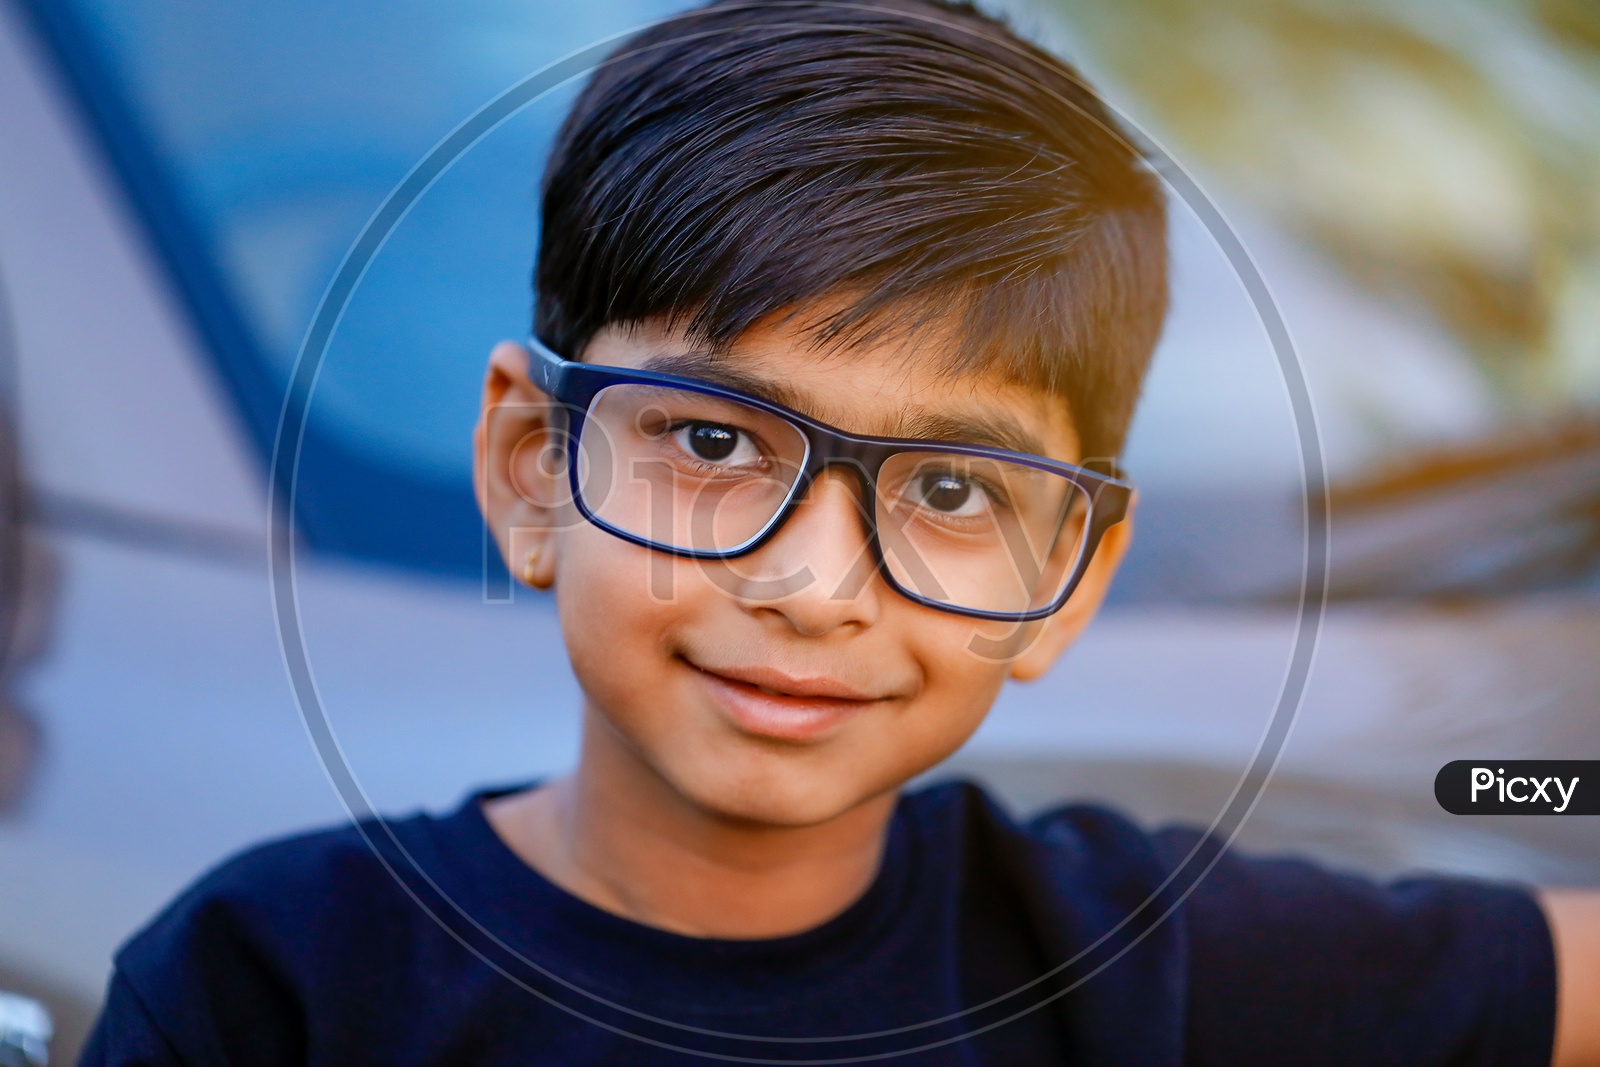 Indian Young Kid or Child Wearing Spectacles And Posing